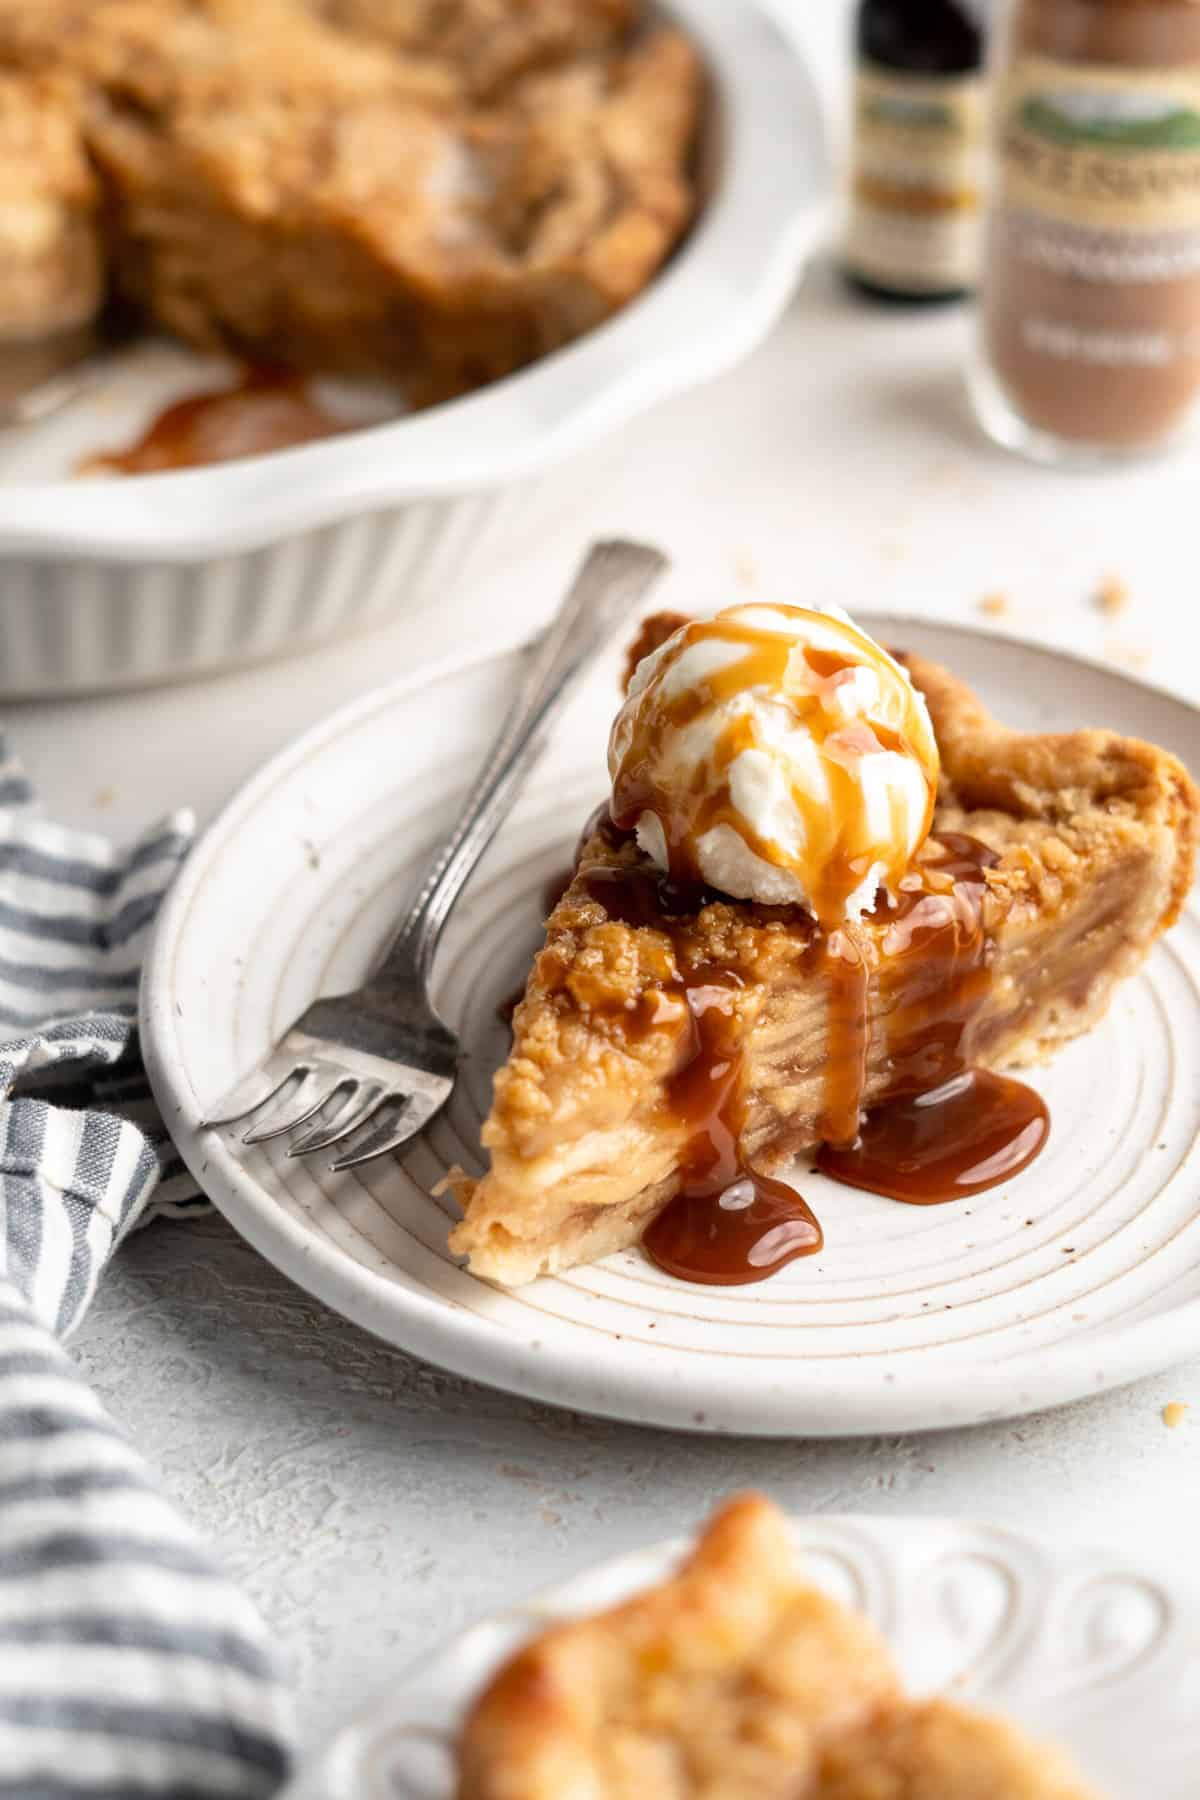 A slice of apple pie with caramel sauce and ice cream on top served on a white plate